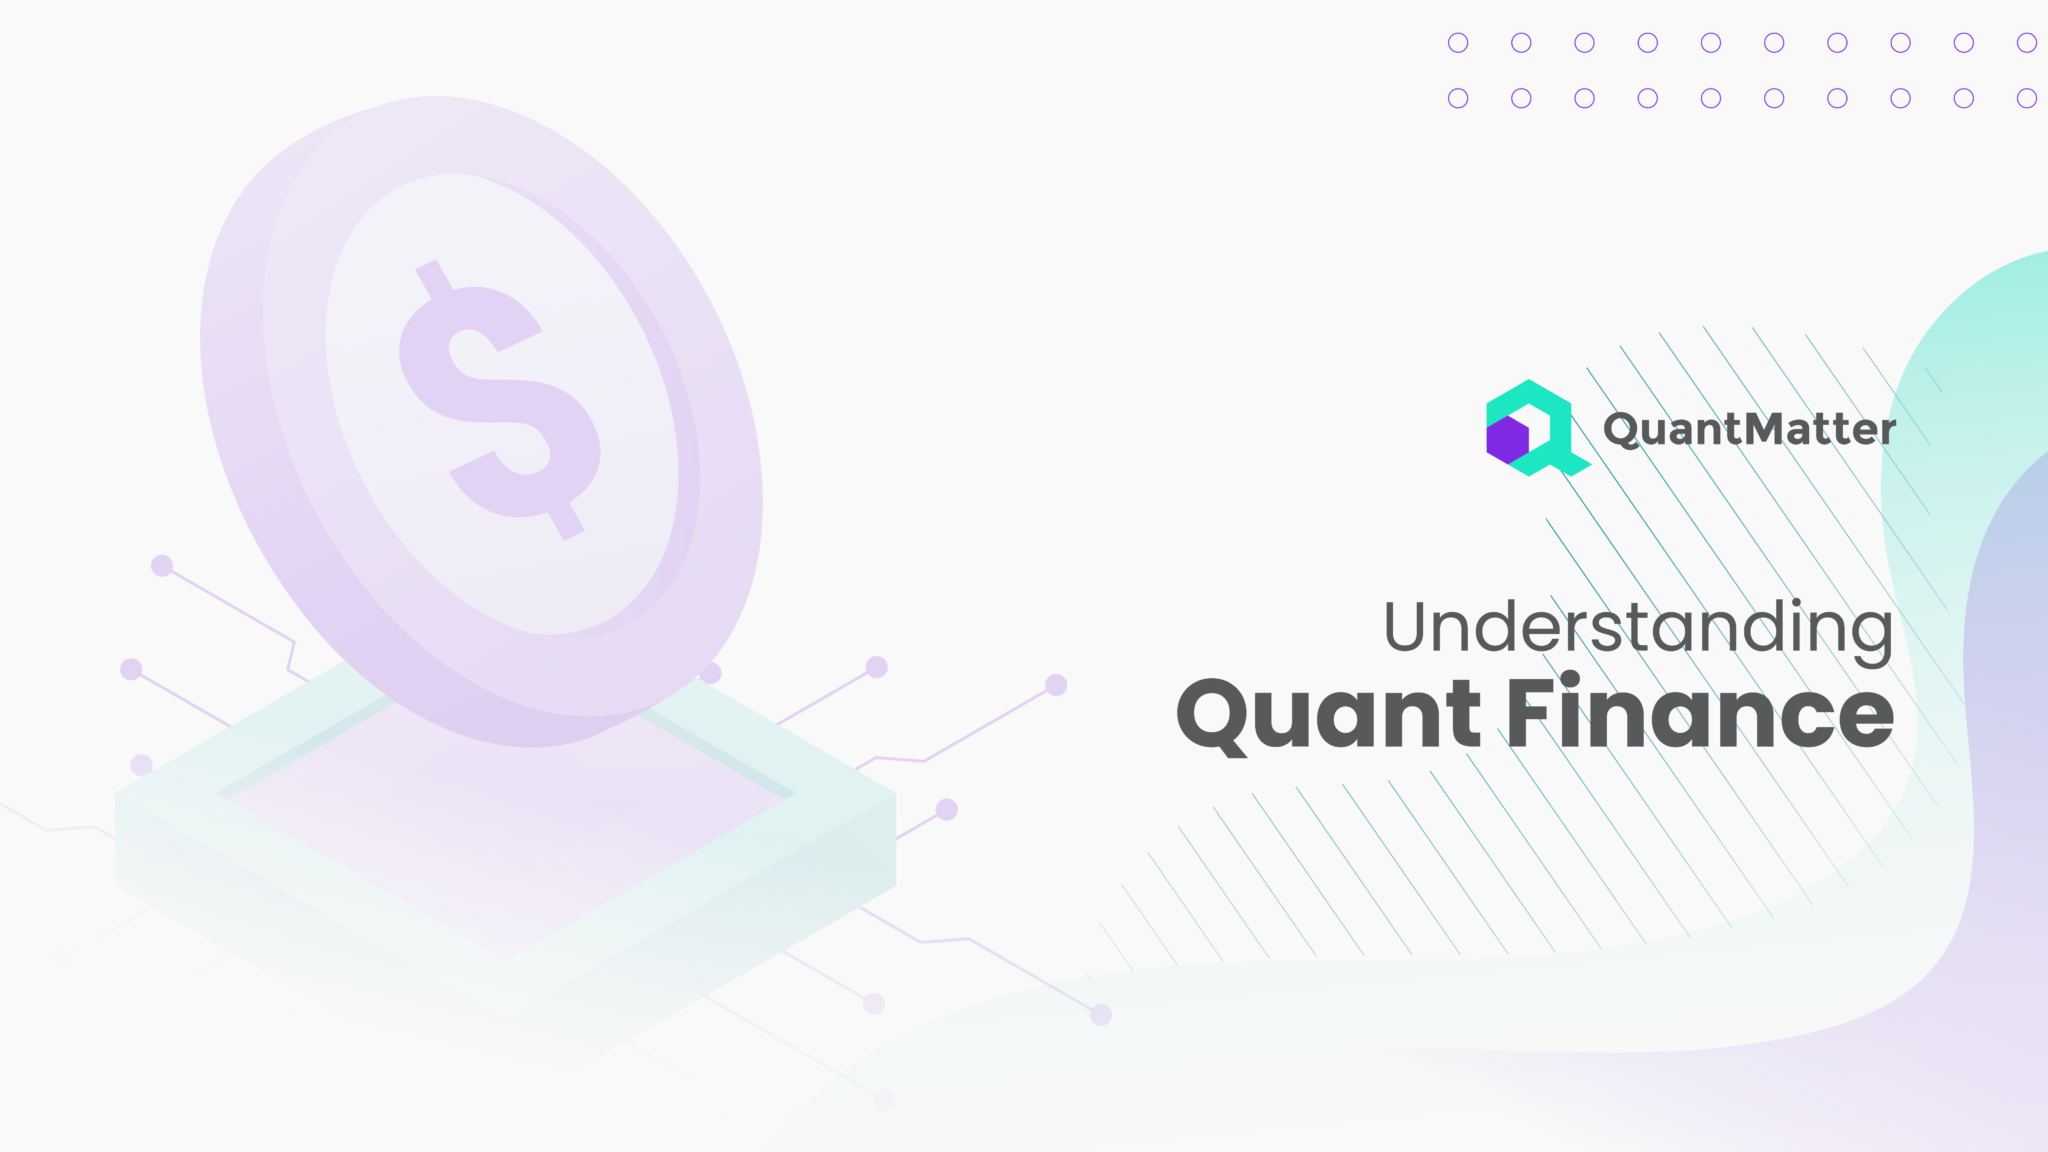 What is Quant Finance? Meaning and Elements